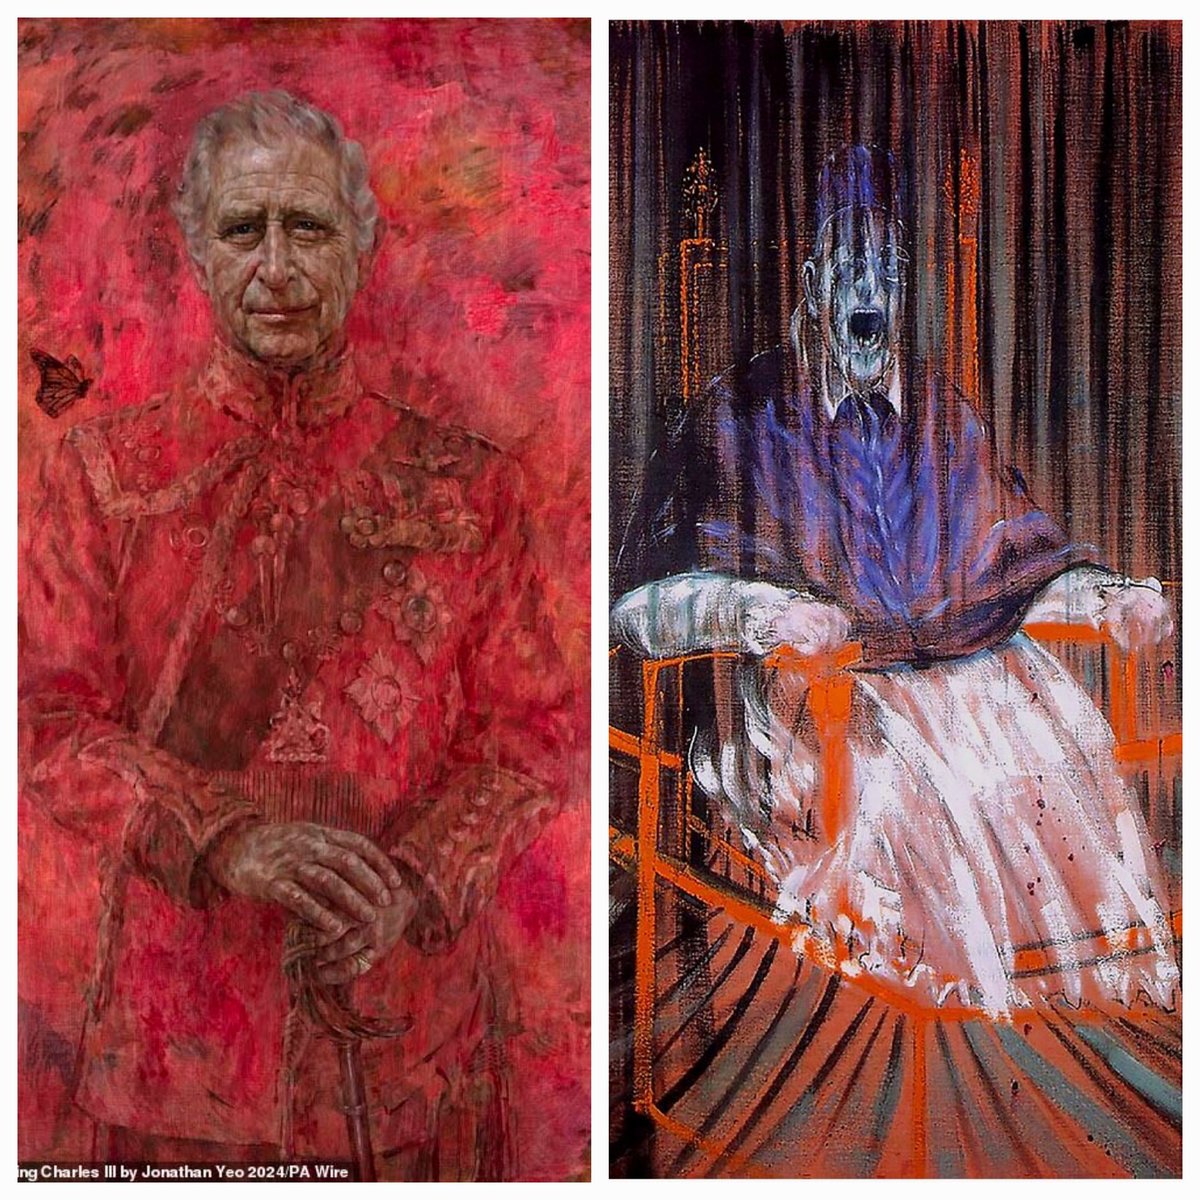 It's giving...Francis Bacon, and not in a good way